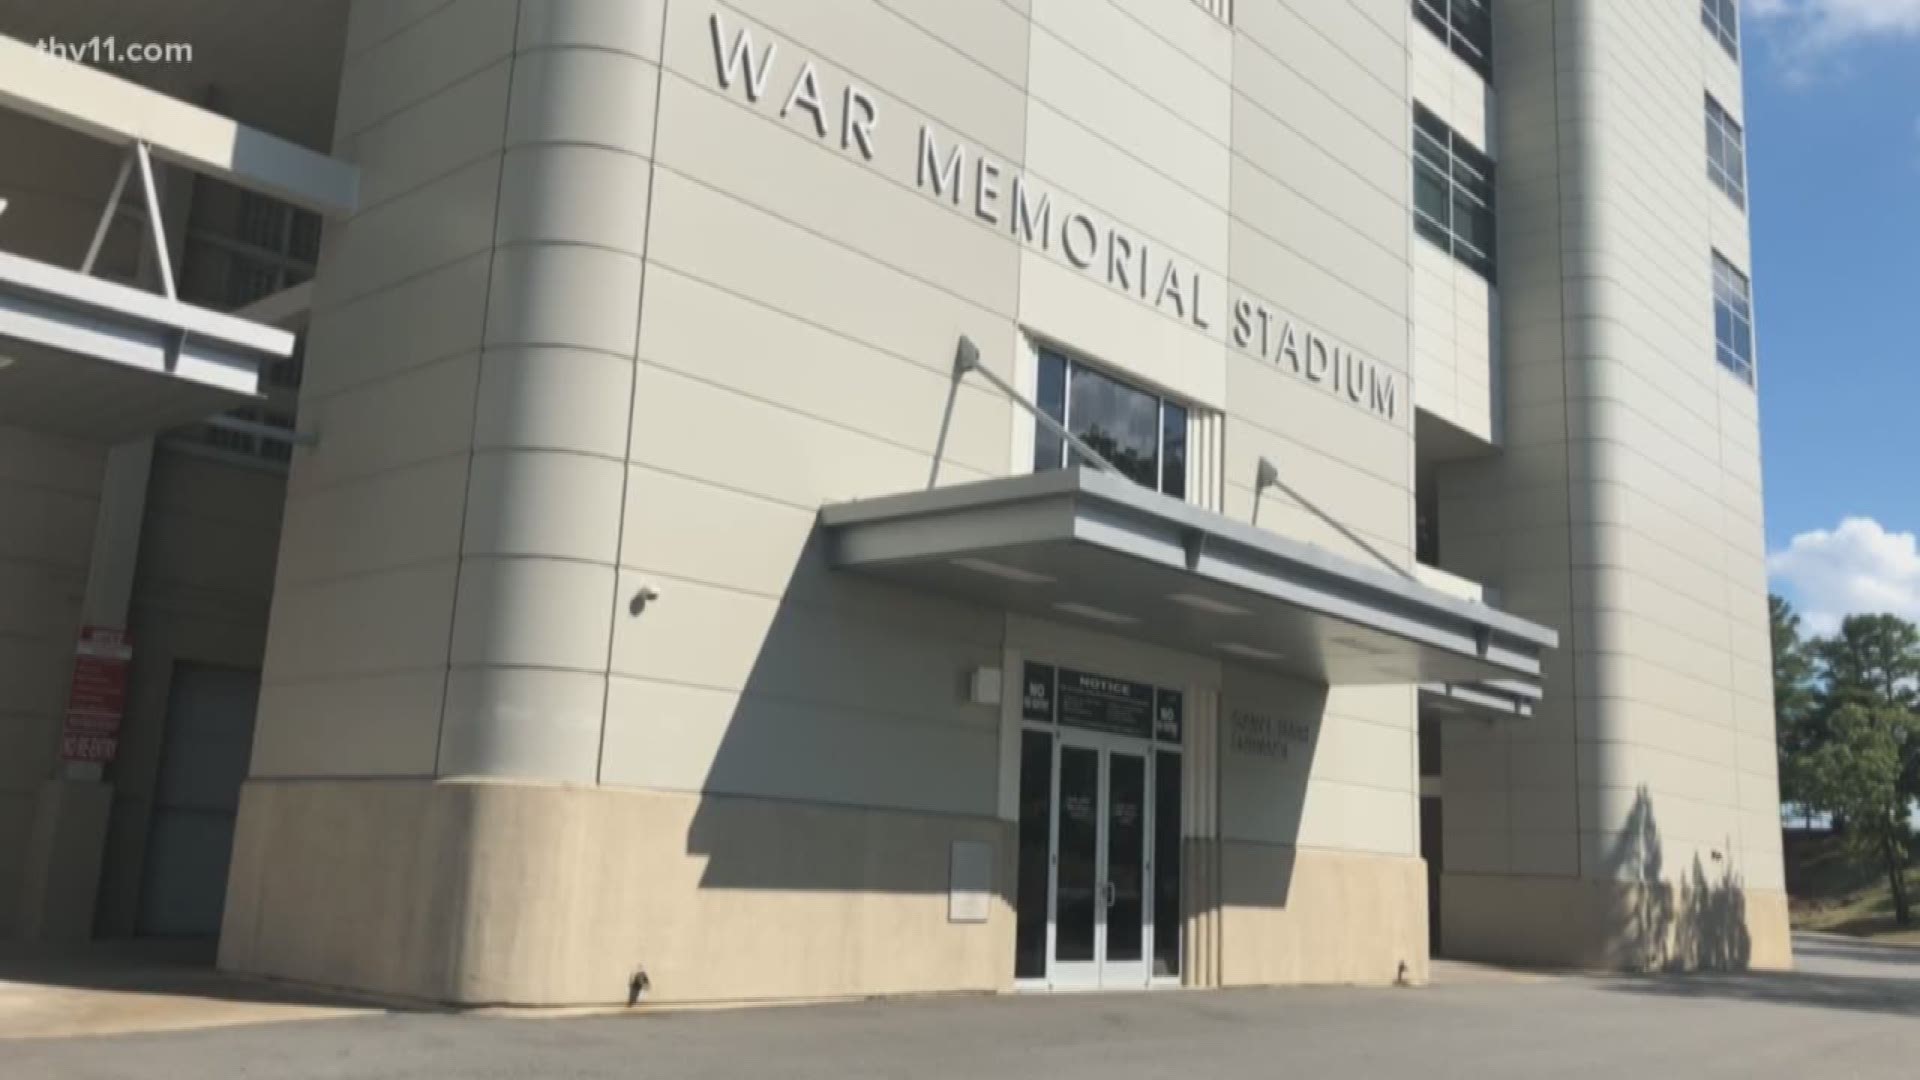 The Parkview Patriots are preparing for a football game on Friday. They're also preparing to be the test case for new security policies at War Memorial Stadium.